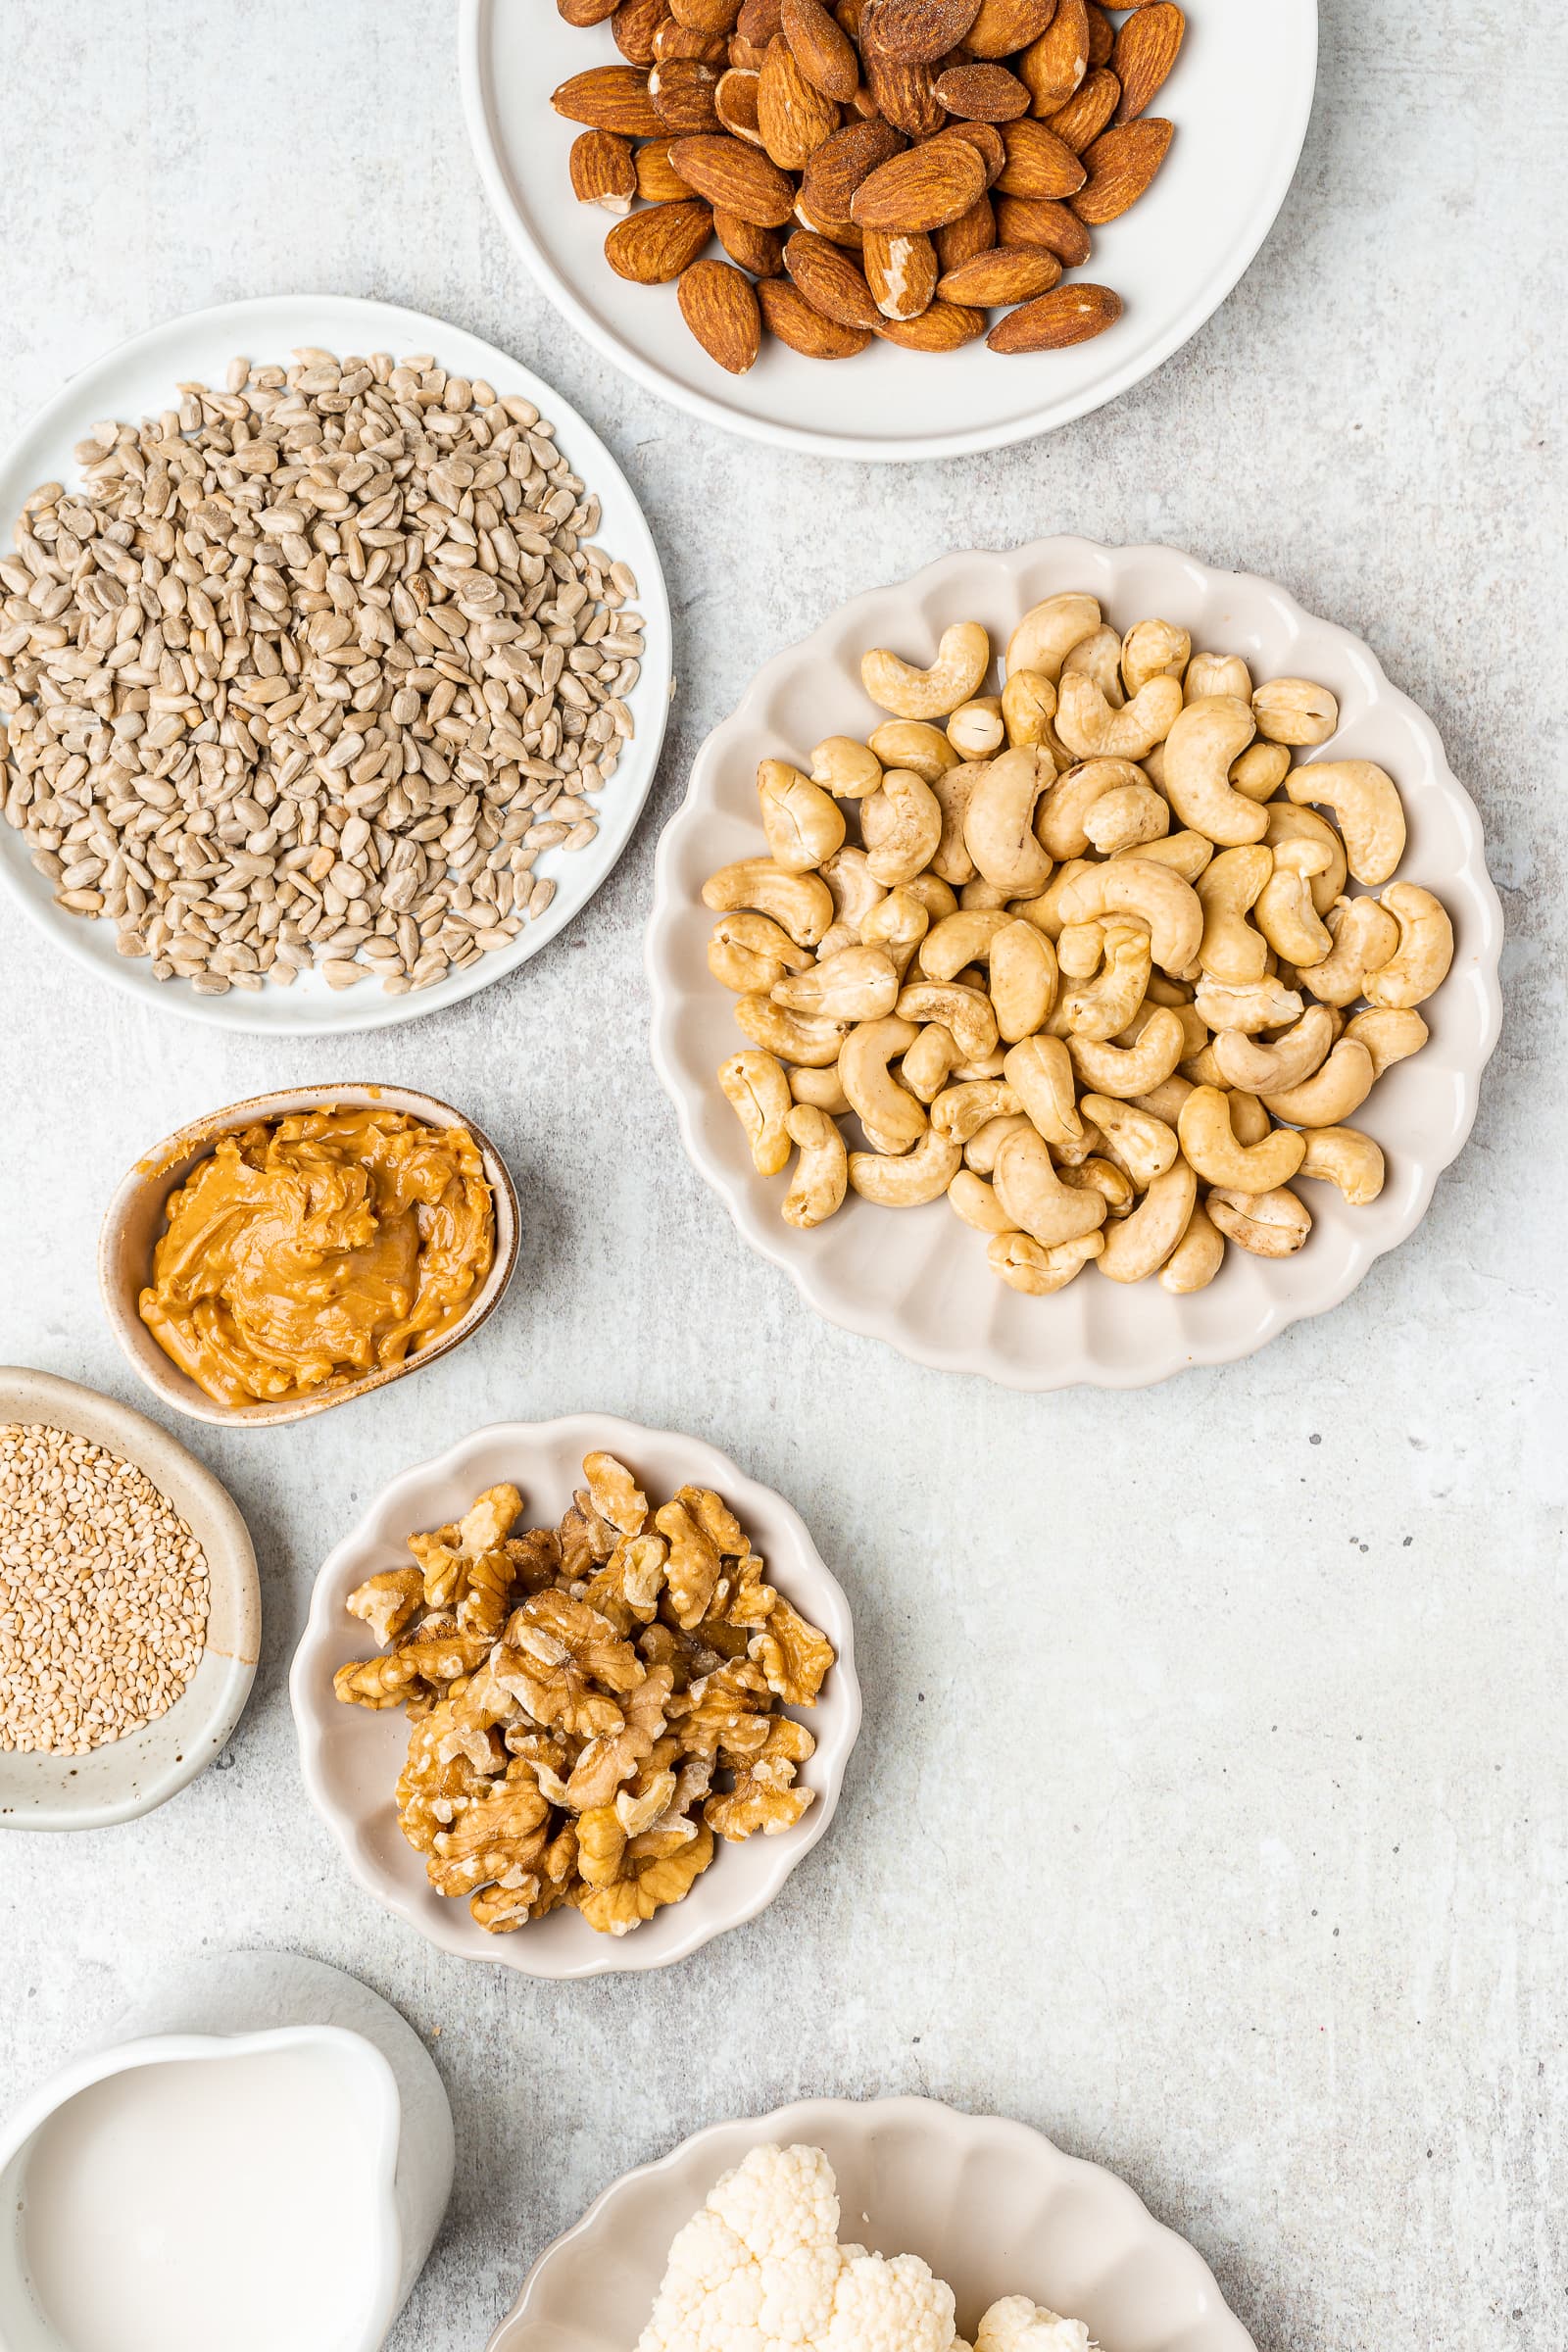 Variety of nuts, seeds, cauliflower, and peanut butter on small serving plates.